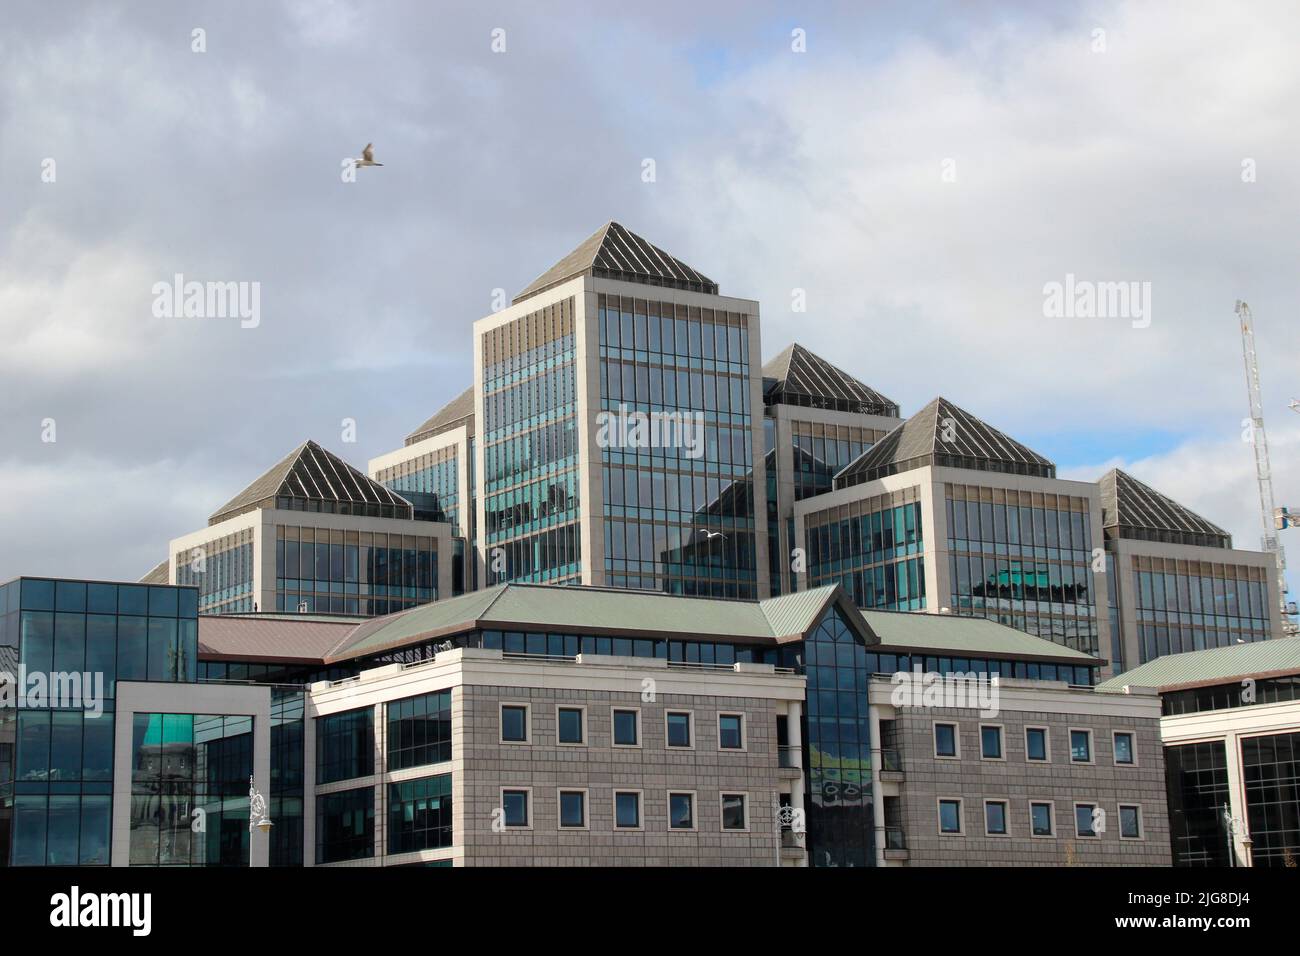 Head Office, Headquarters, of the Ulster Bank Group on the River Liffey in the banking district in Dublin, Ireland, Europe Stock Photo